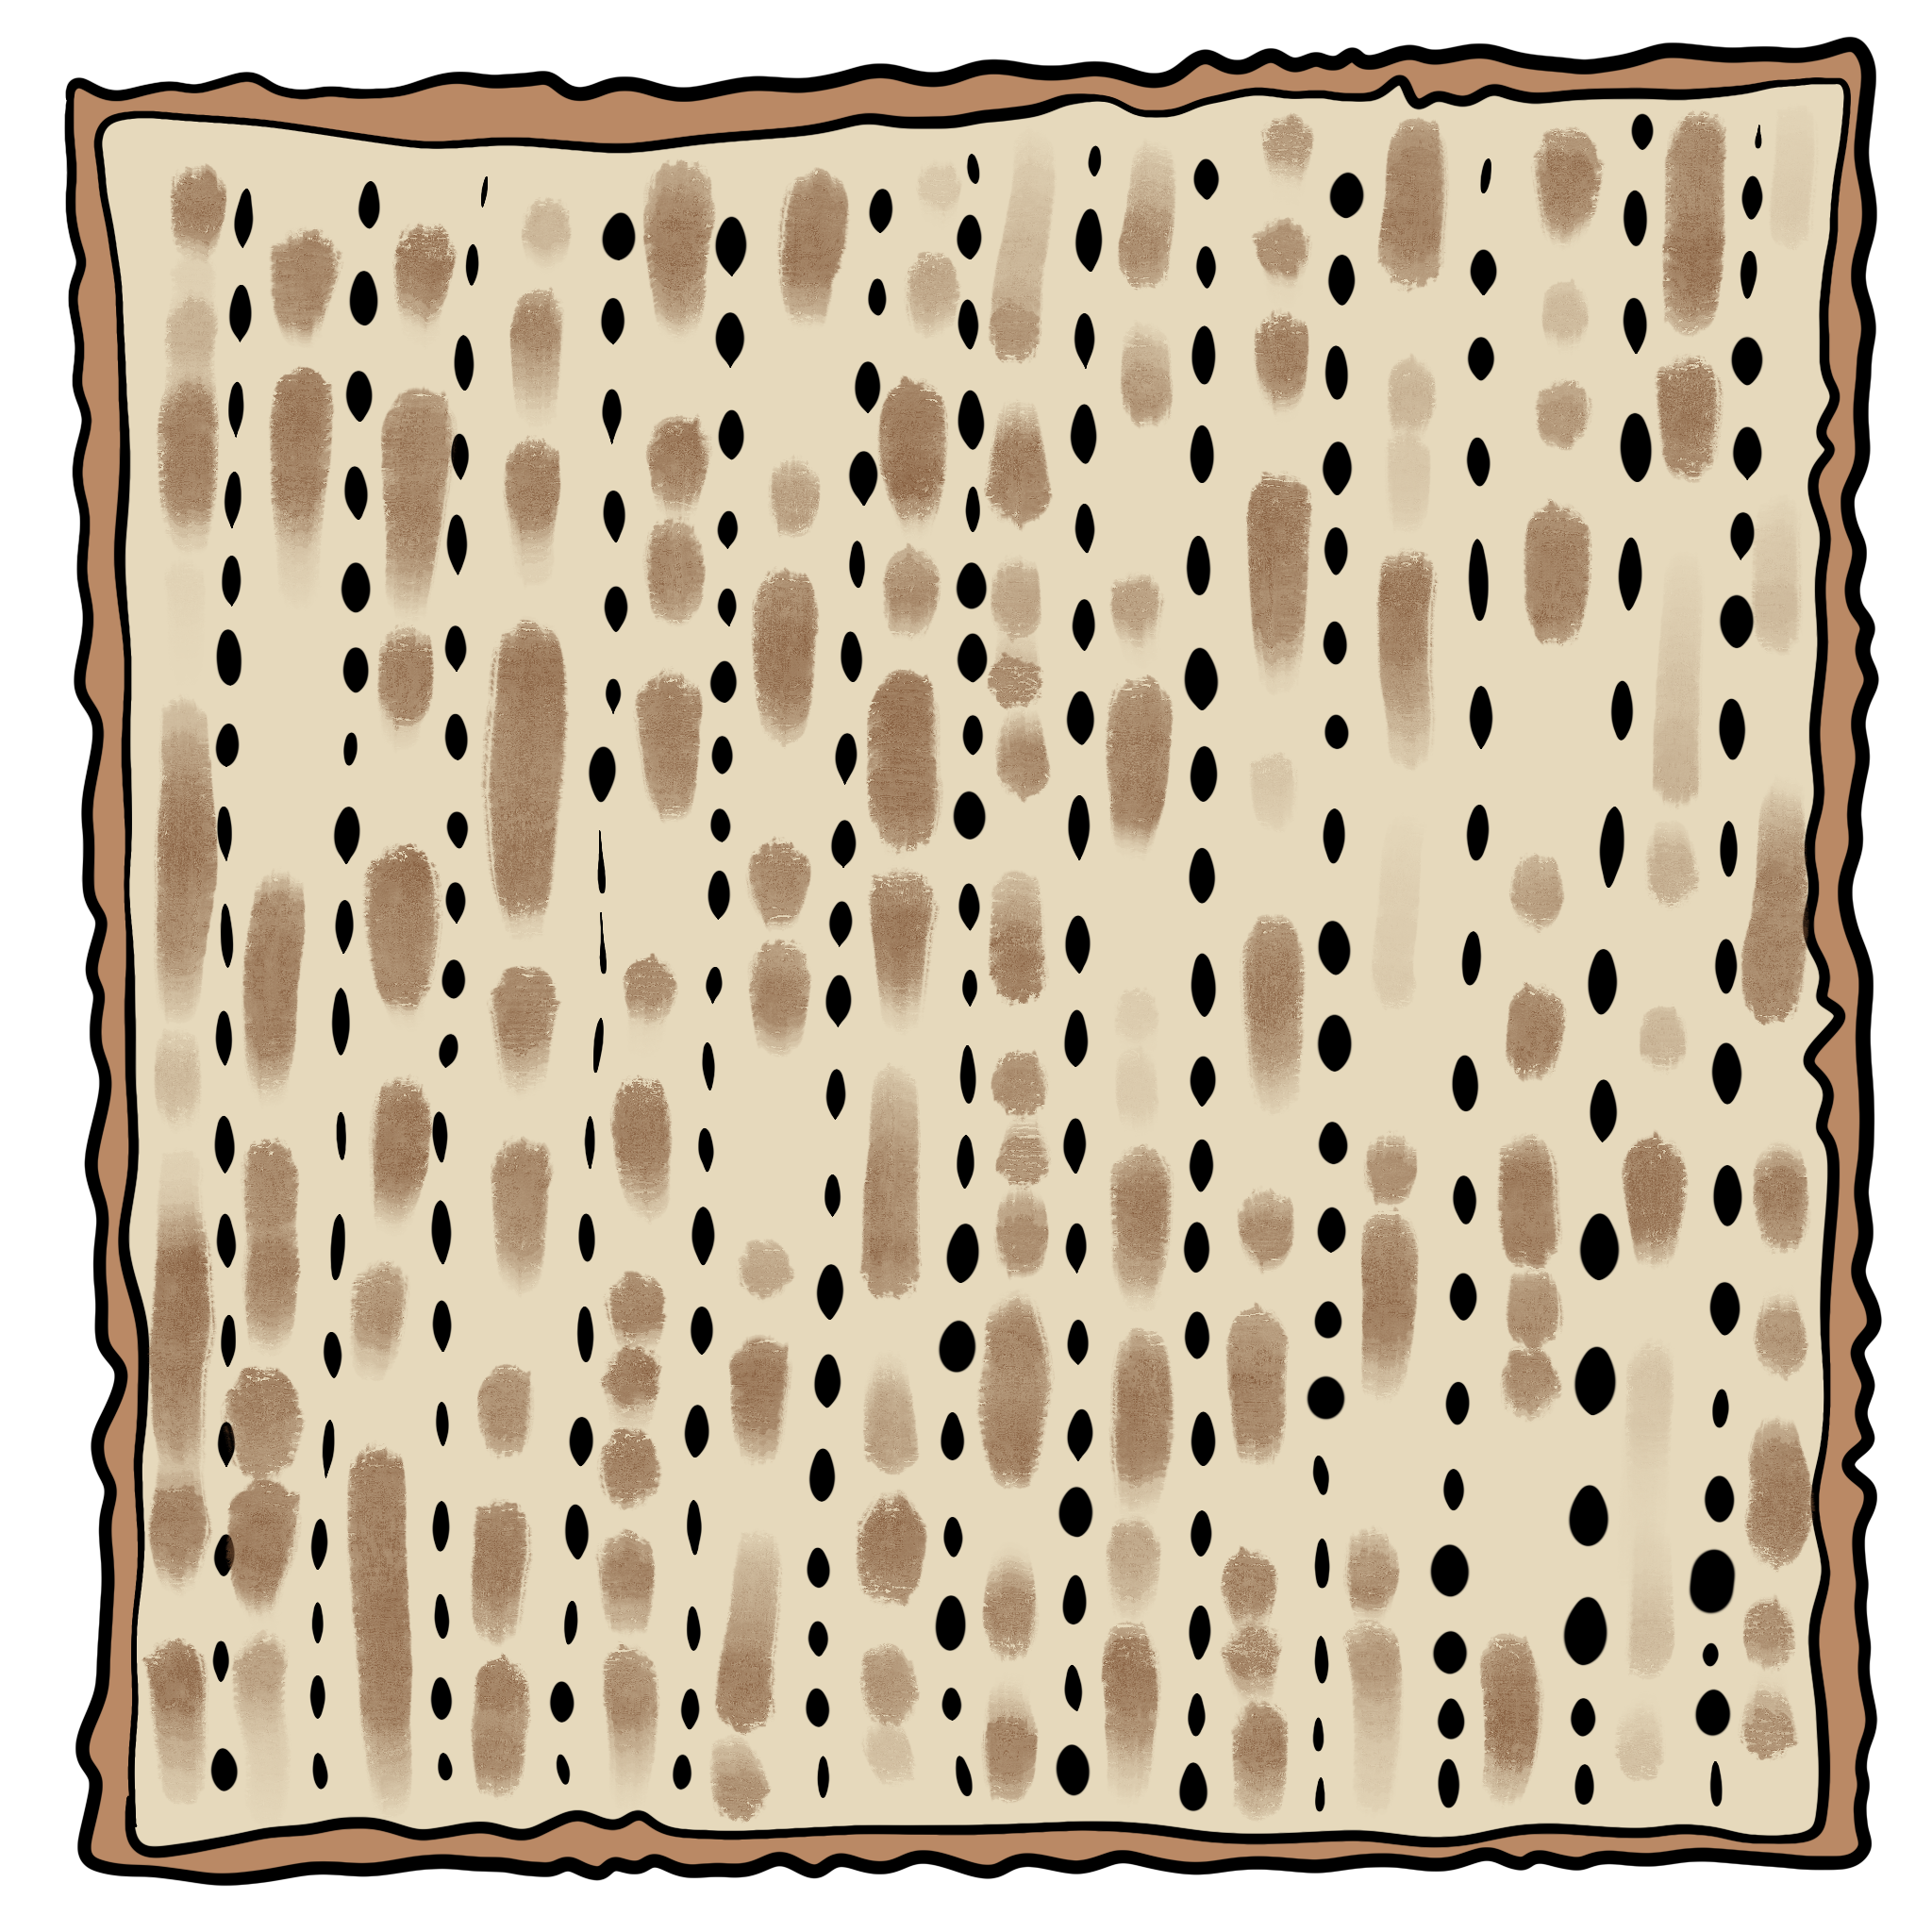 square light tan colored sheet of matzah with light brown speckles and vertical rows of puncture marks and a light brown border.